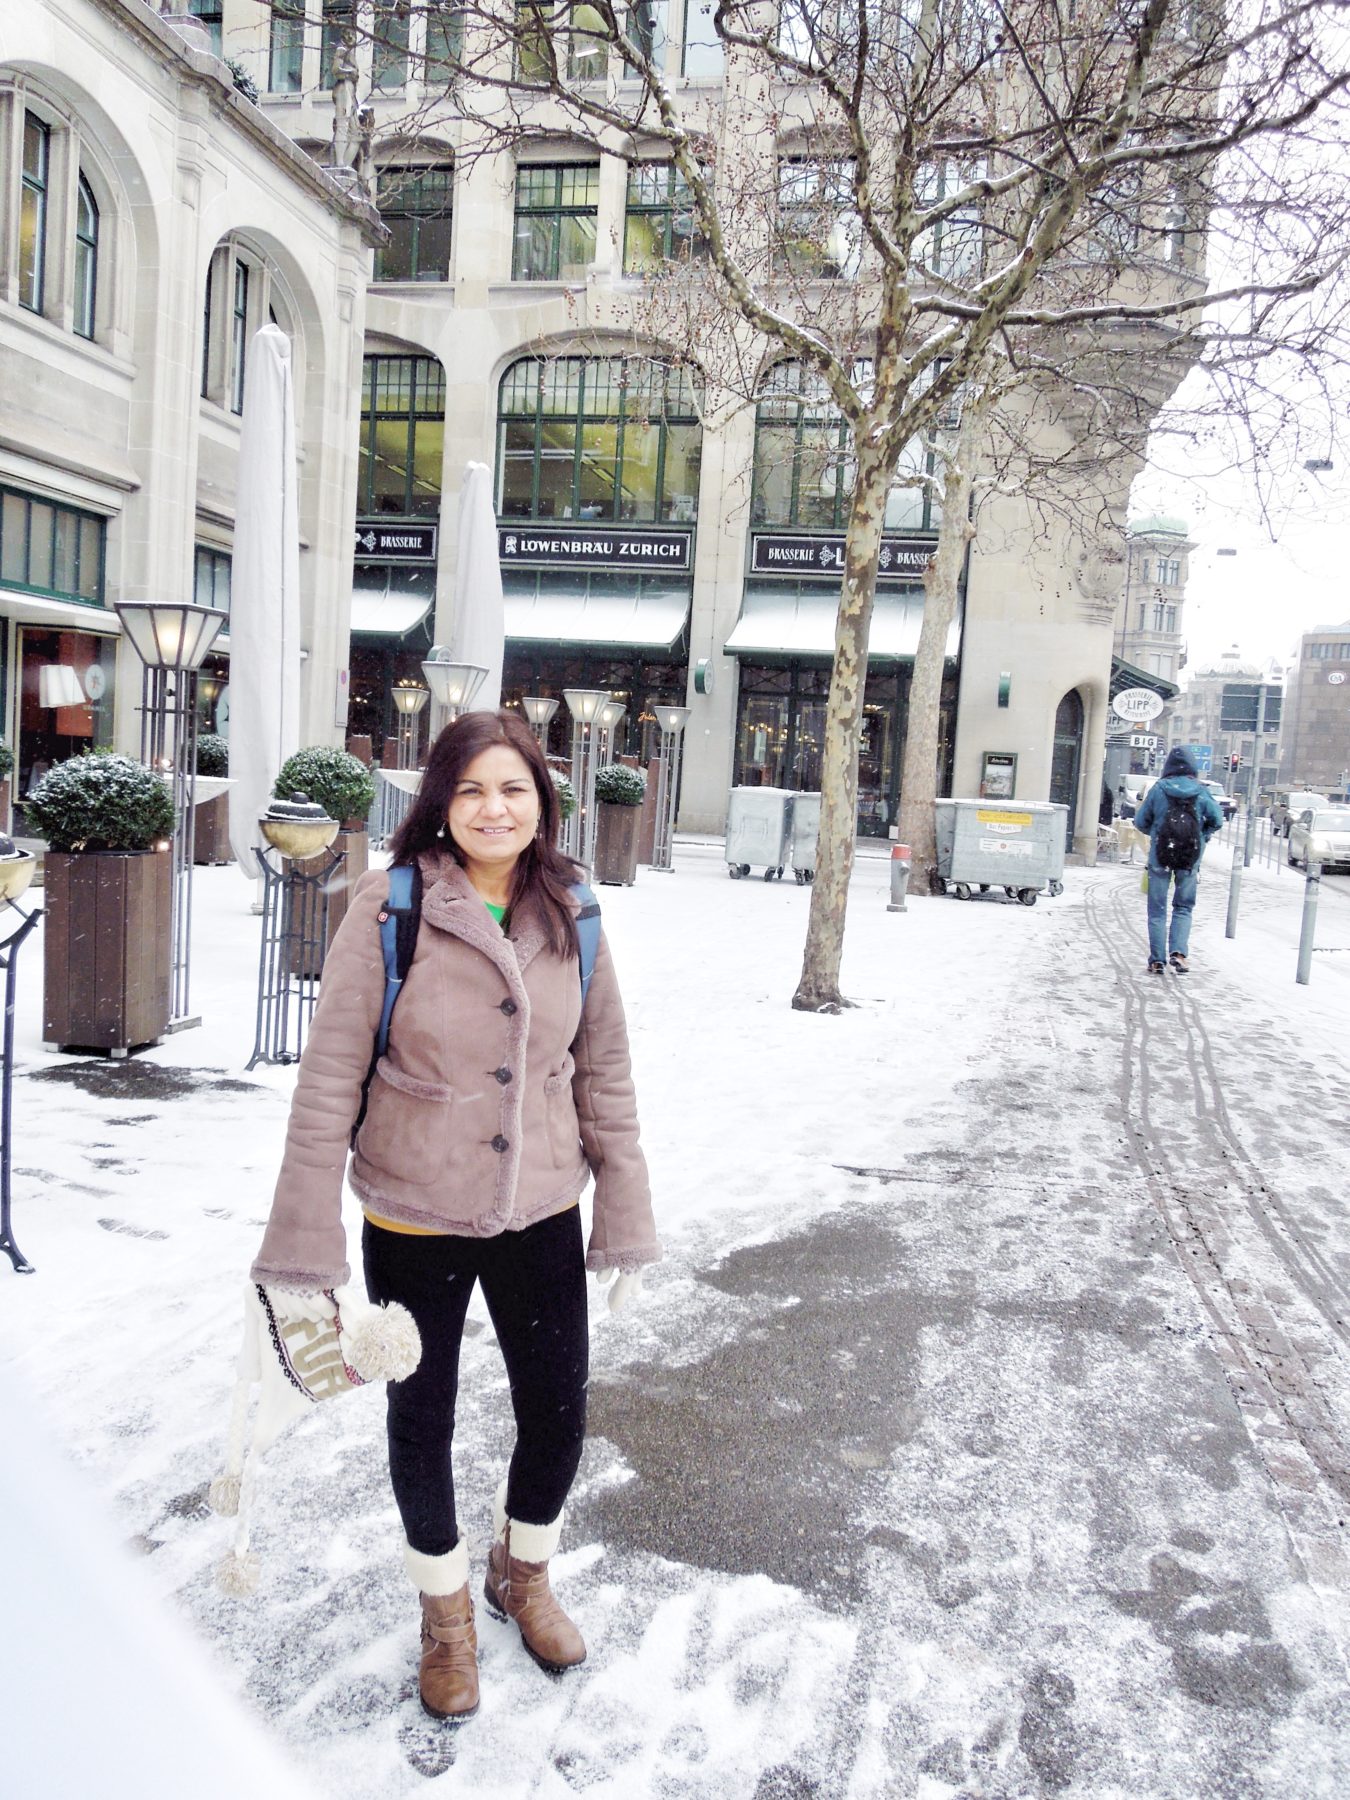 Winter Travel Tips: How To Dress For The Cold Without Looking Like a Ball -  The Travel Intern